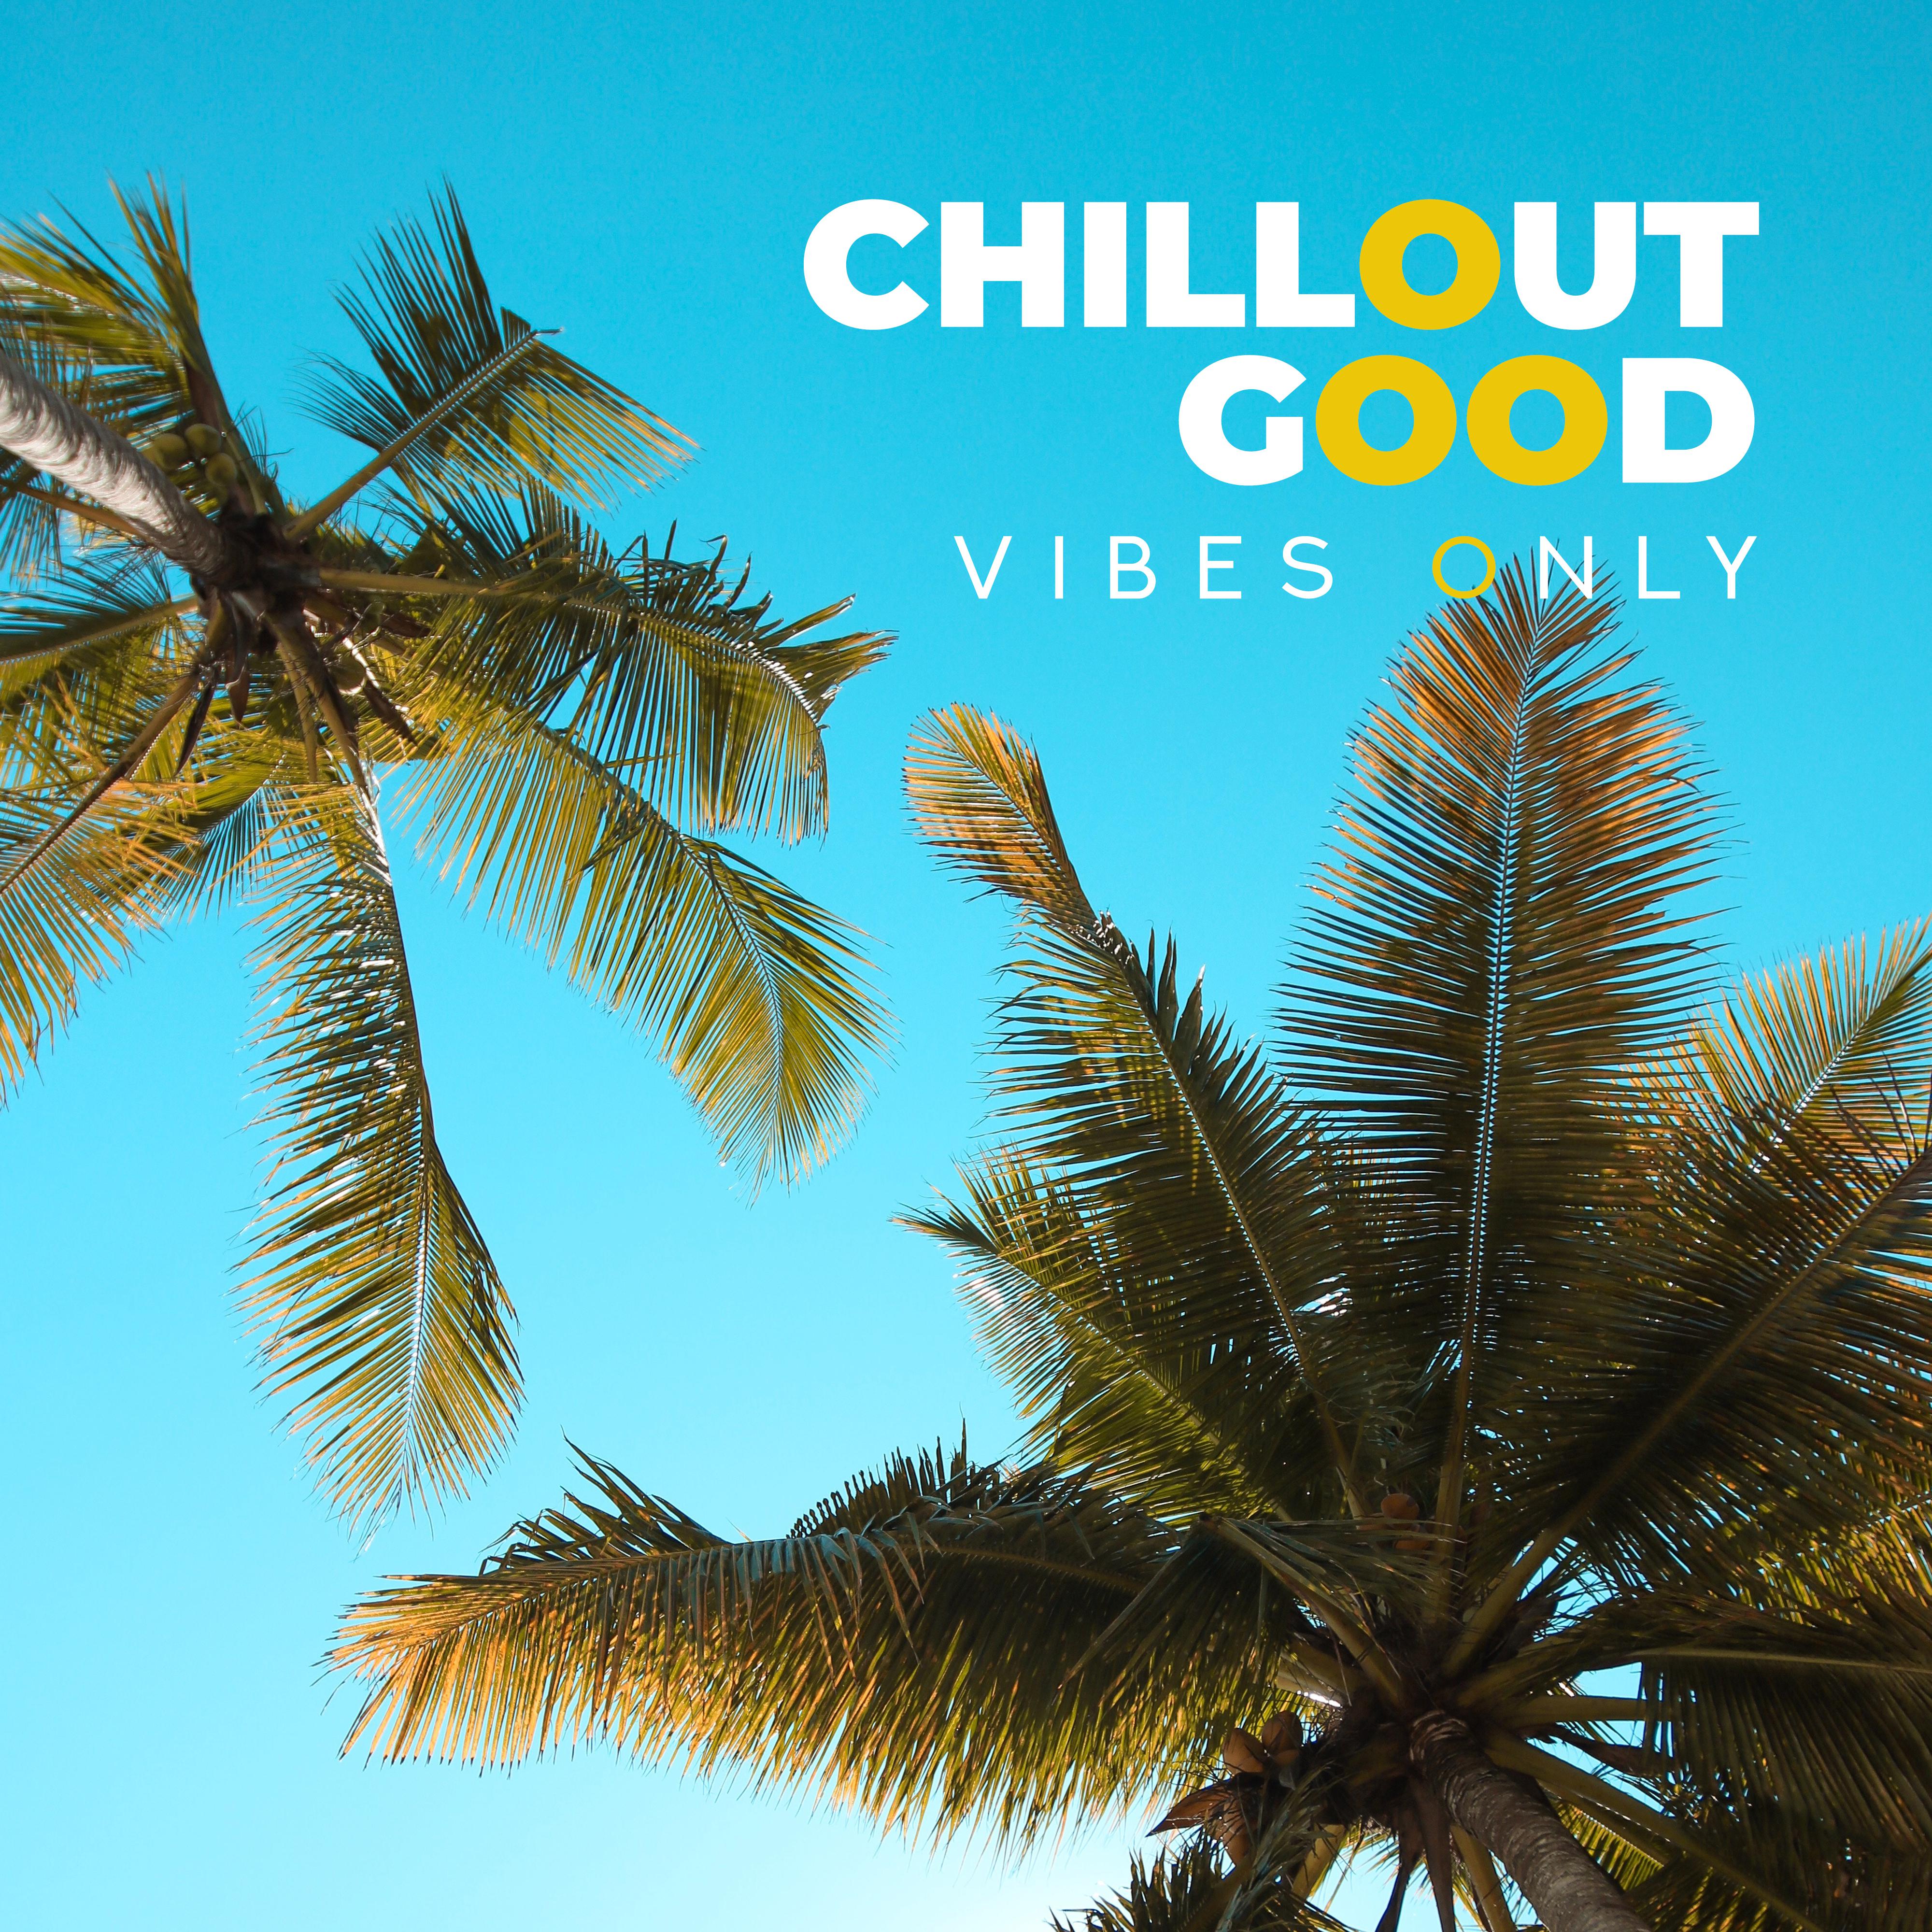 Chillout Good Vibes Only: Selection of Best Chill Out Tracks for Ibiza Party, Dancefloor Killers, Beach Relaxing Beats